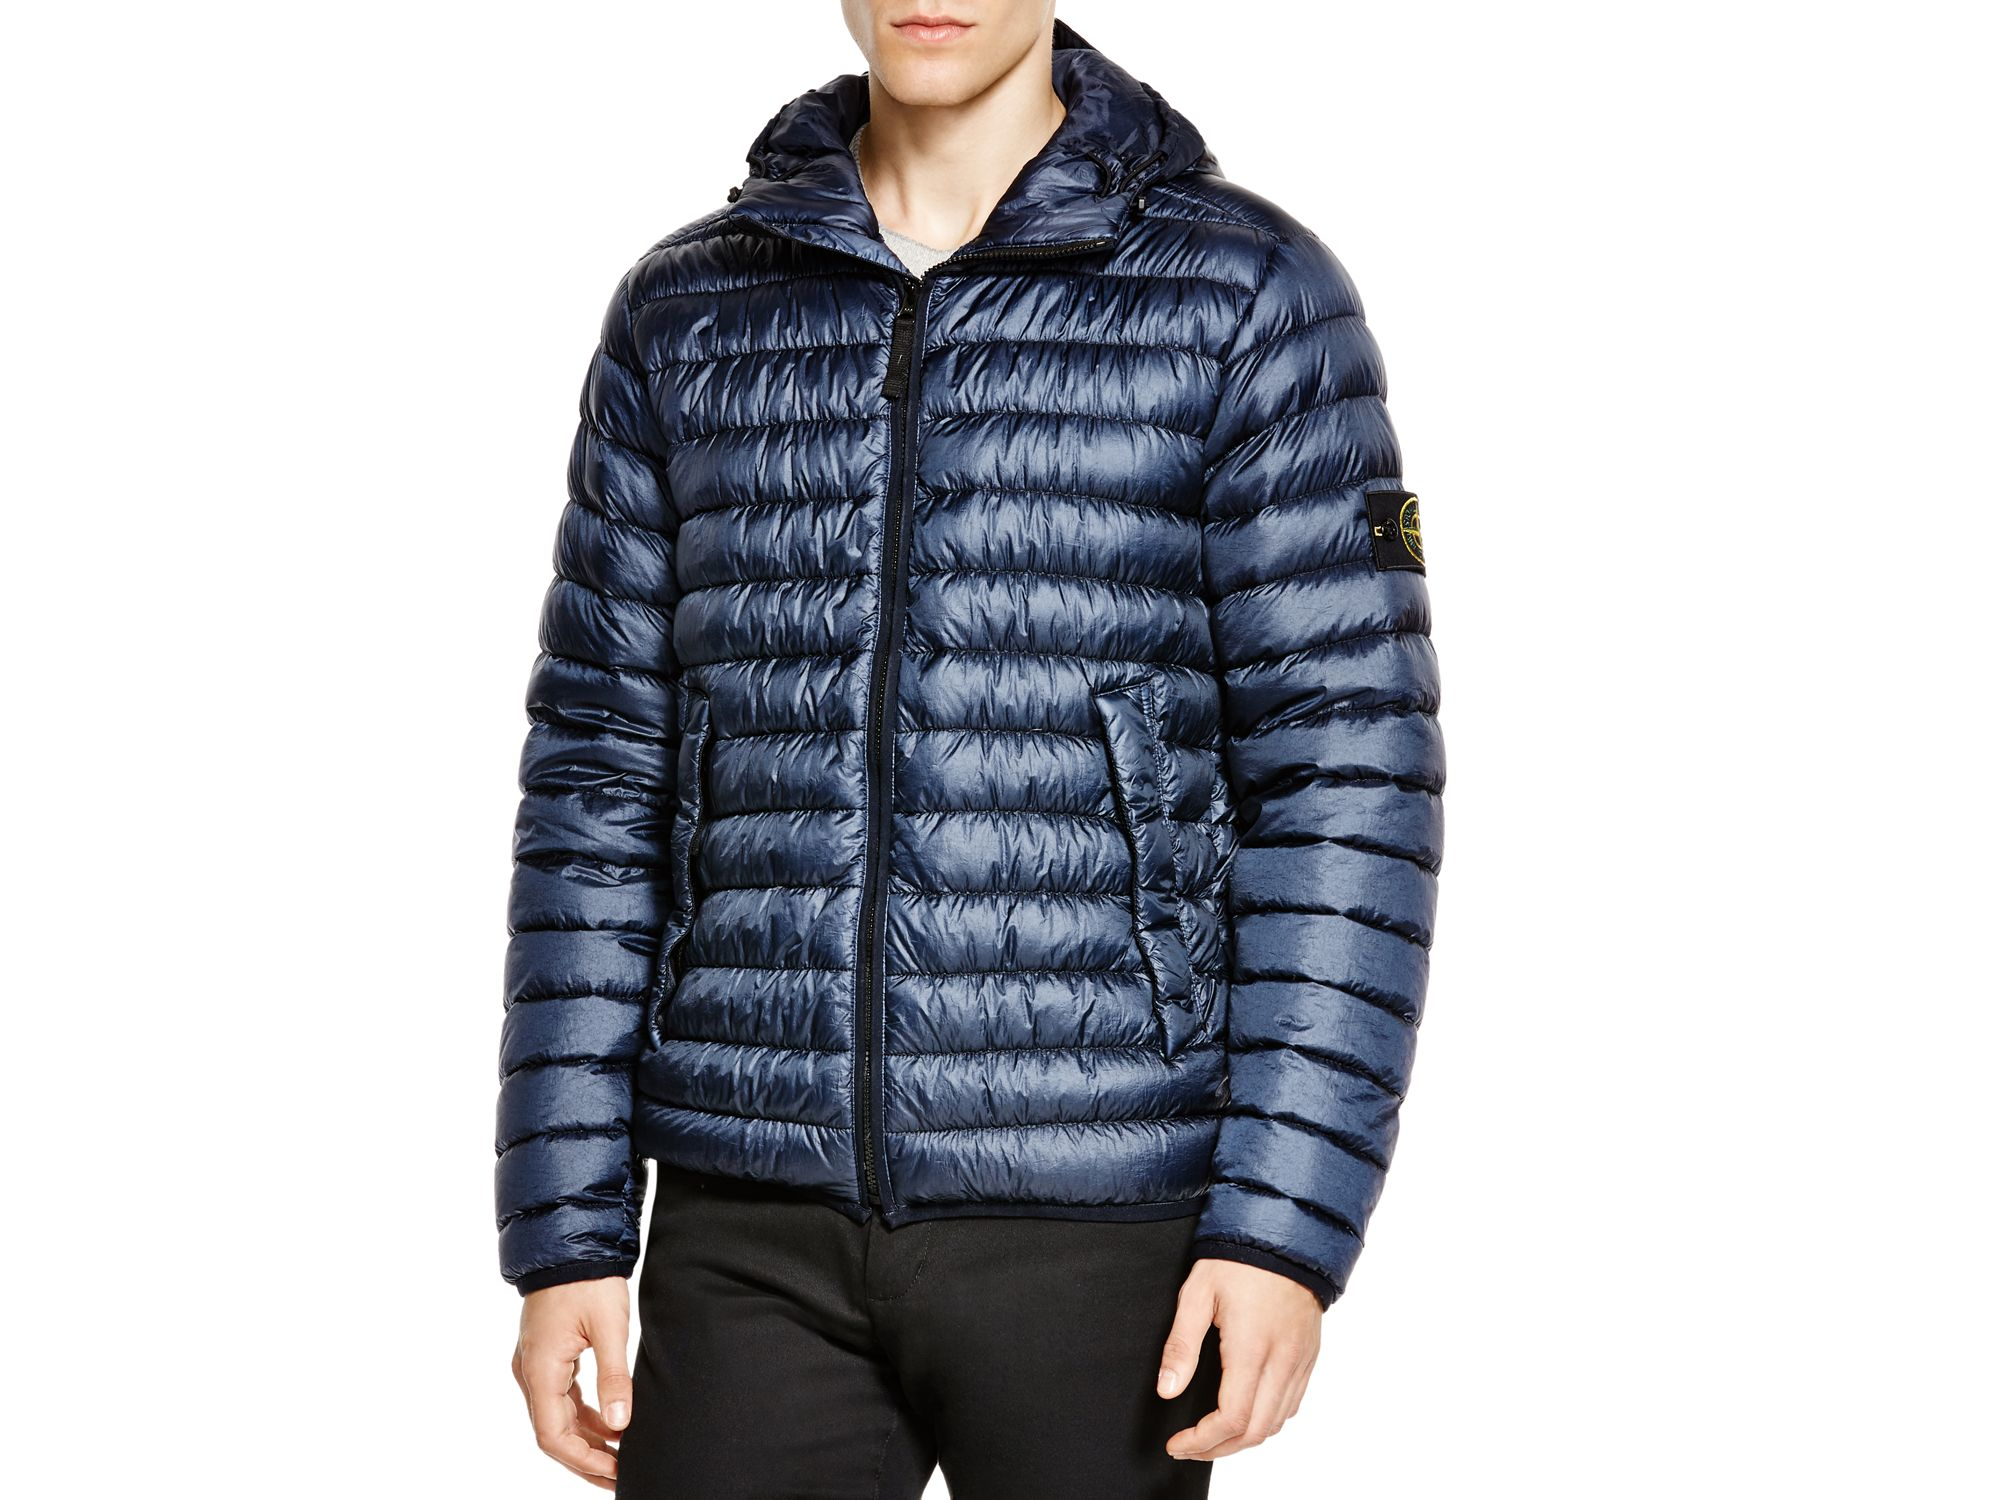 Stone Island Hooded Down Jacket in Navy Blue (Blue) for Men - Lyst